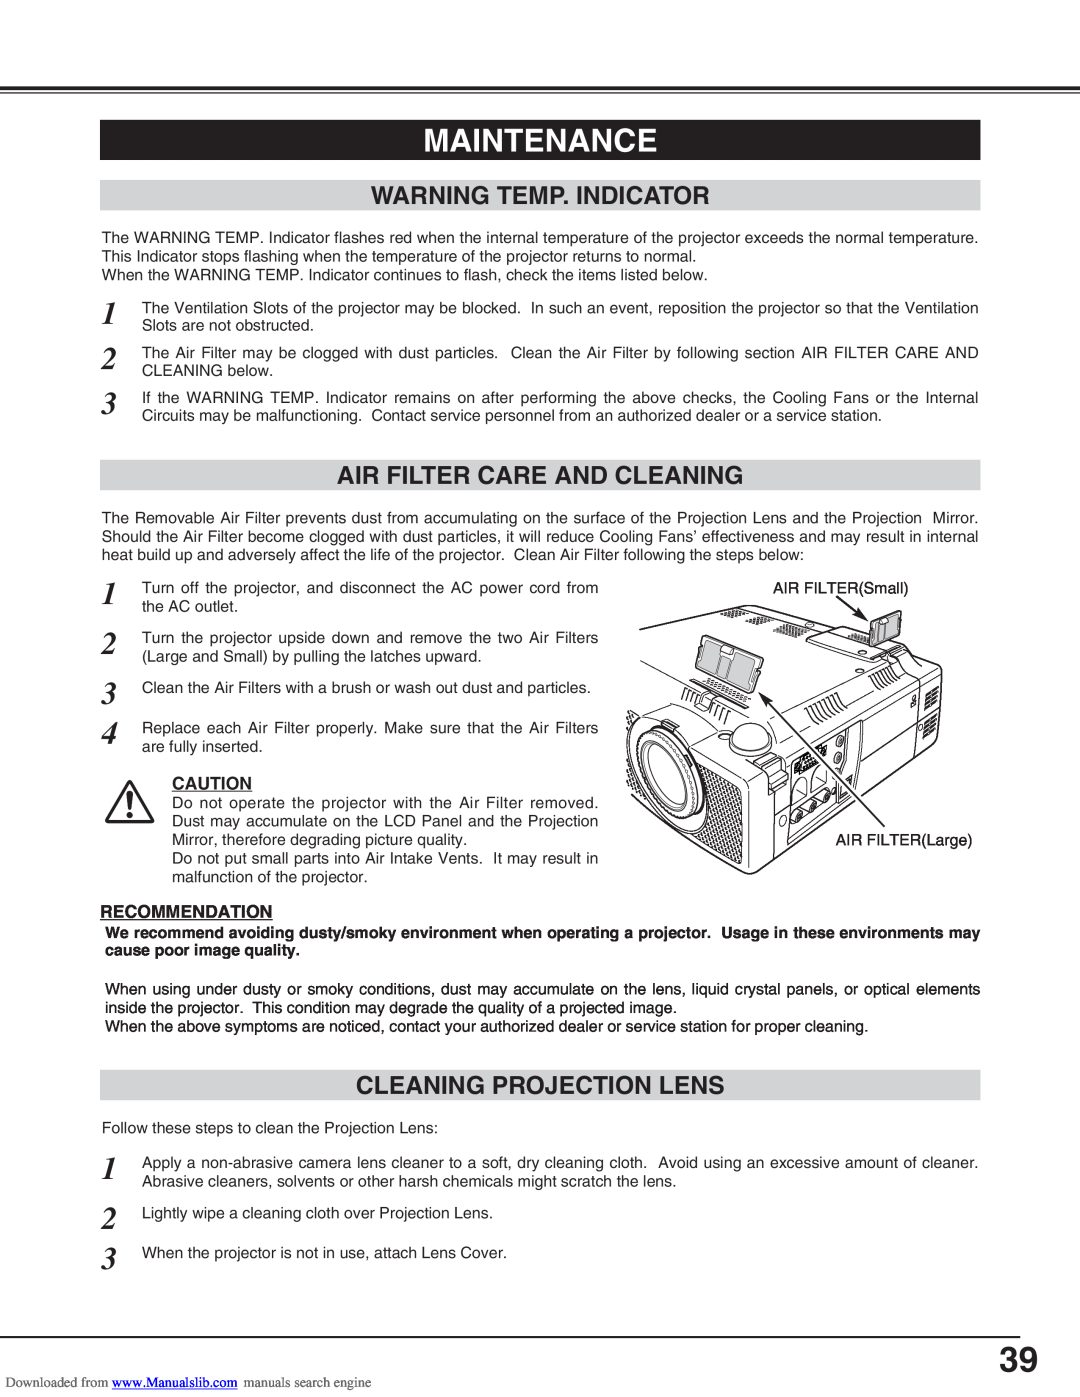 Canon LV-S2 owner manual Maintenance, Warning Temp. Indicator, Air Filter Care And Cleaning, Cleaning Projection Lens 